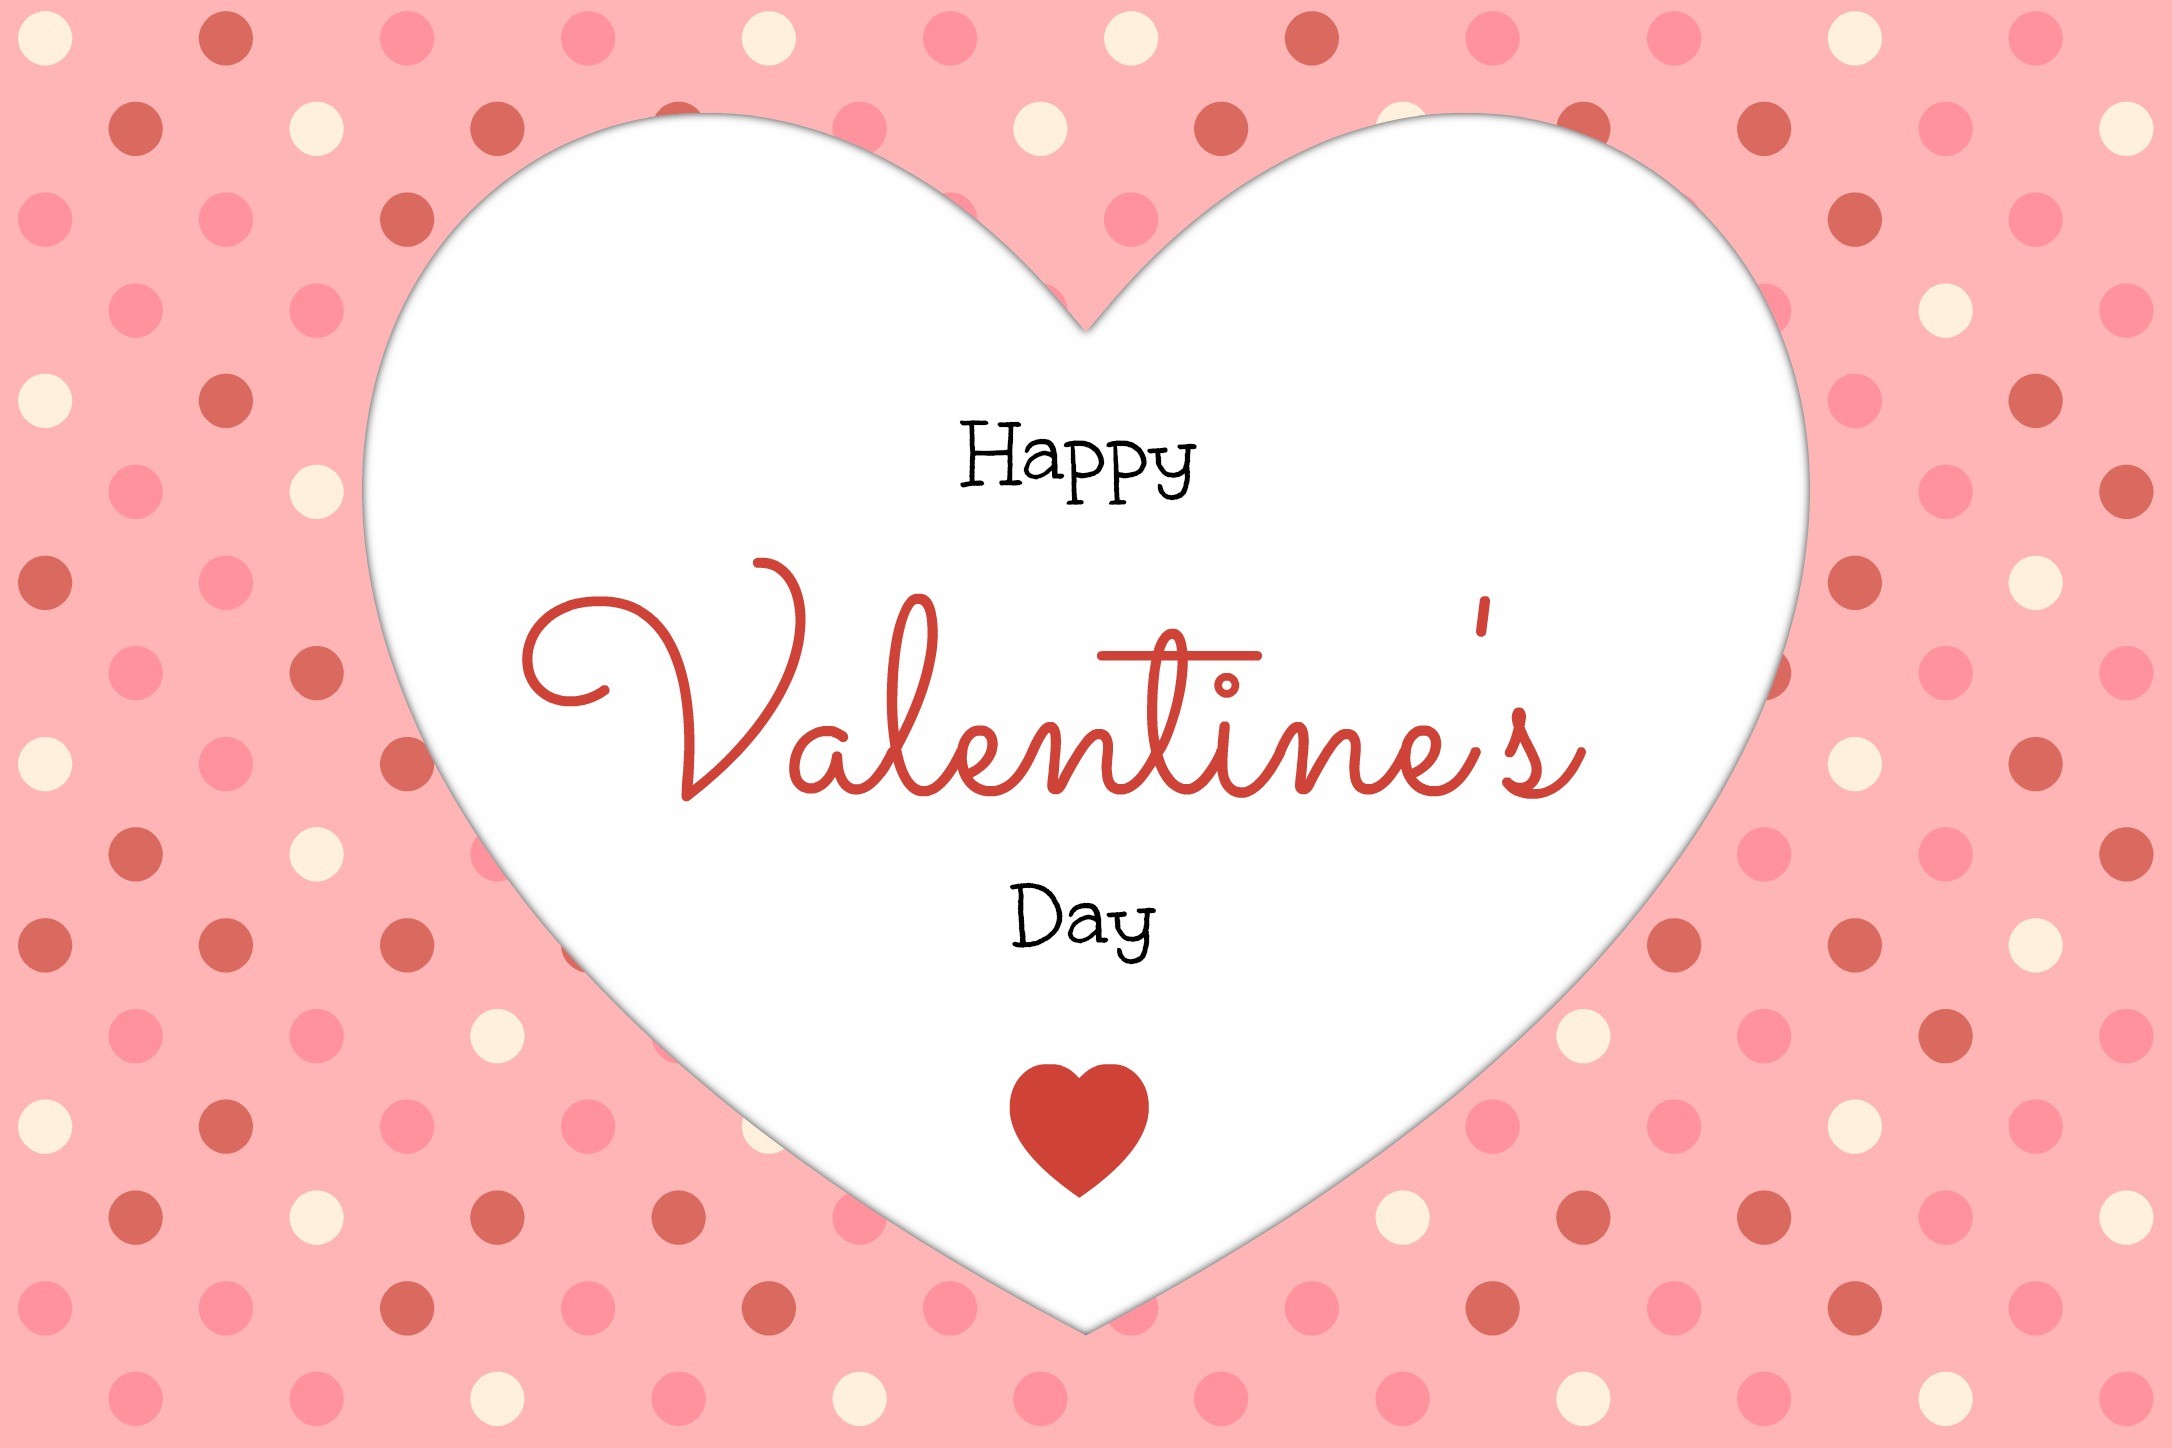 2172x1448 happy valentines day card 2015 hd wallpaper cool images download artwork  smart phones colourful pictures samsung phone wallpapers display 2172Ã1448  ...